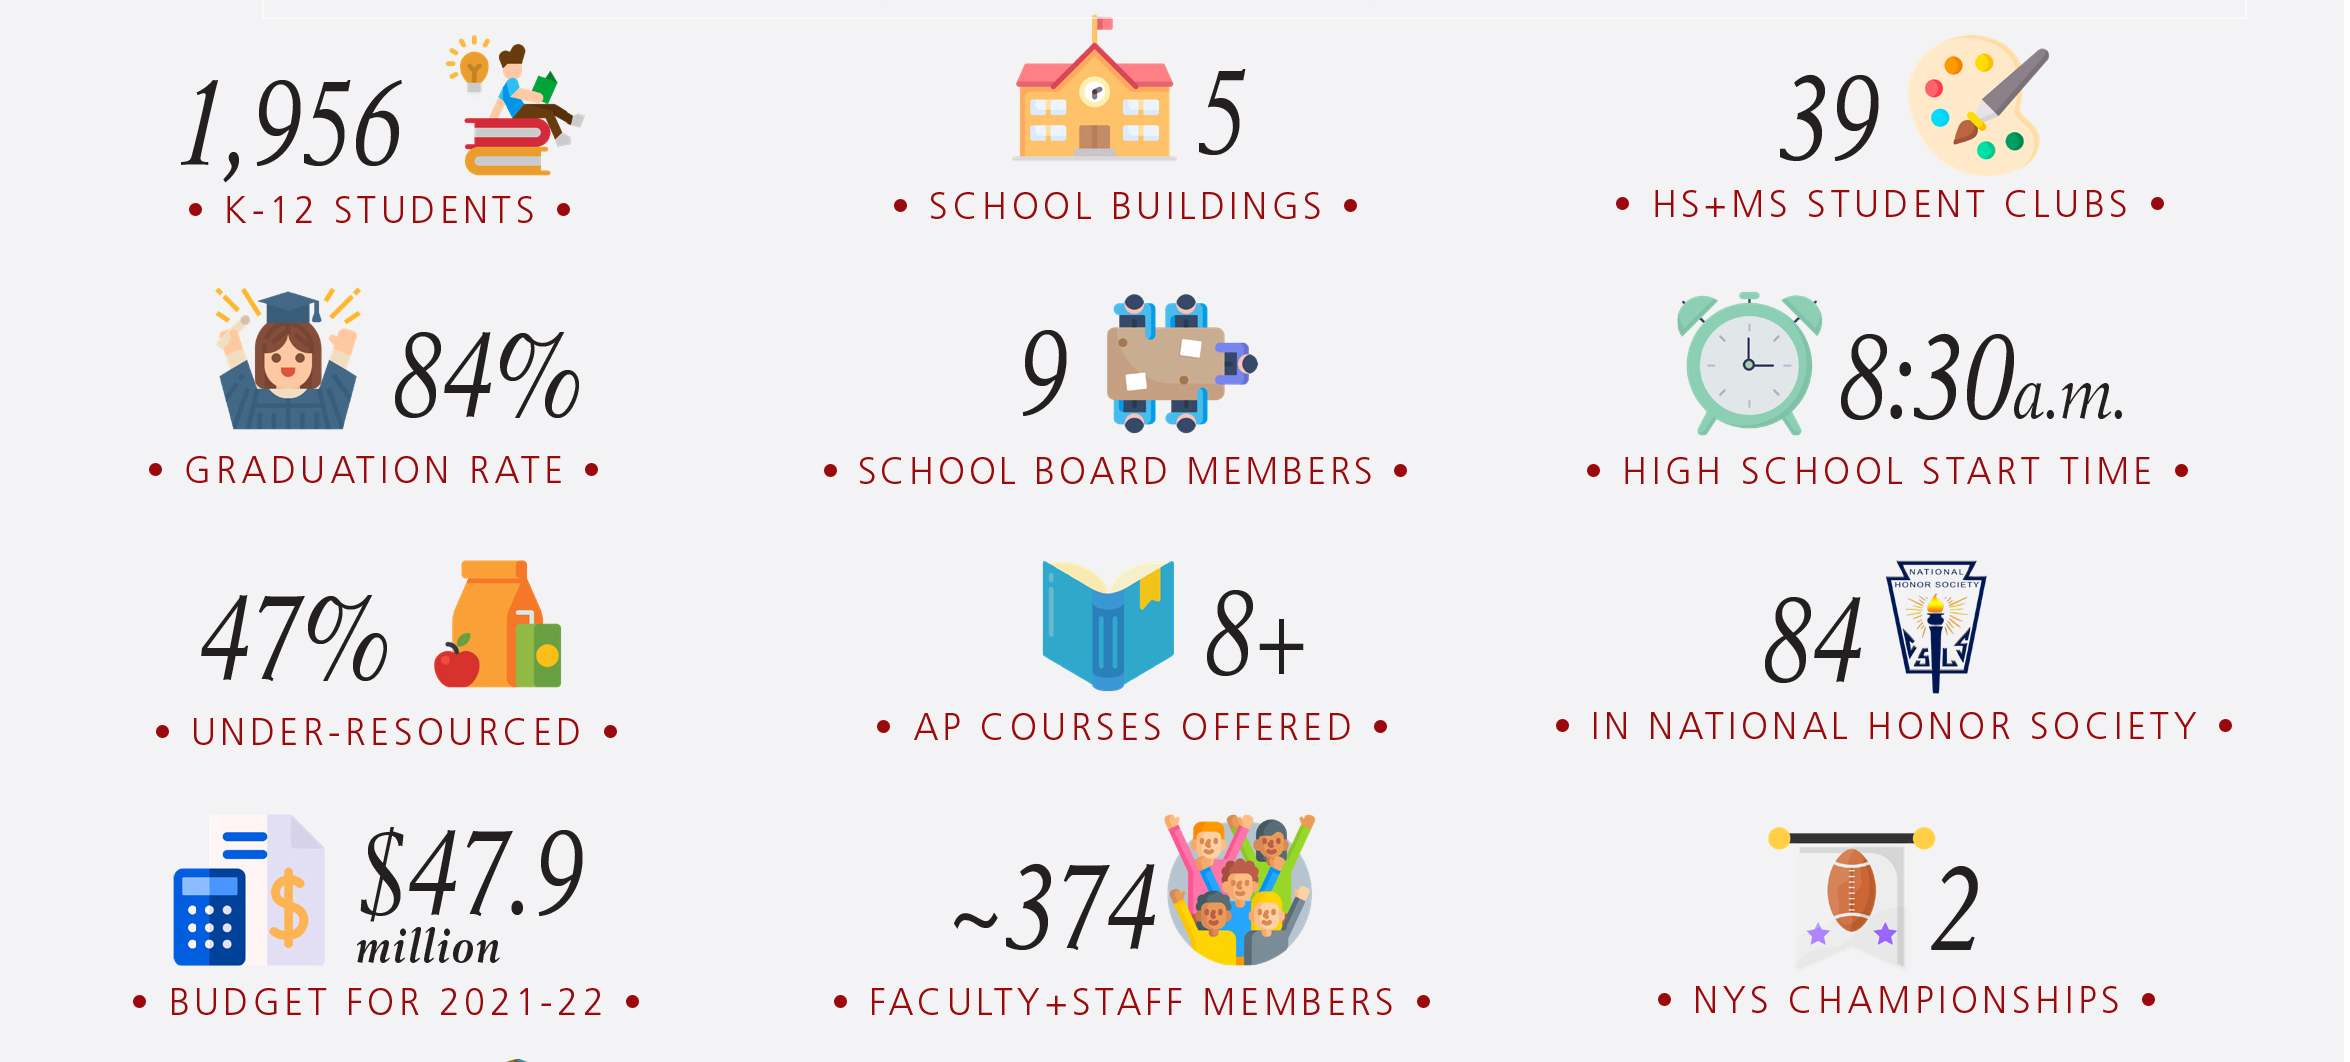 infographic describing some facts about Glens Falls City Schools